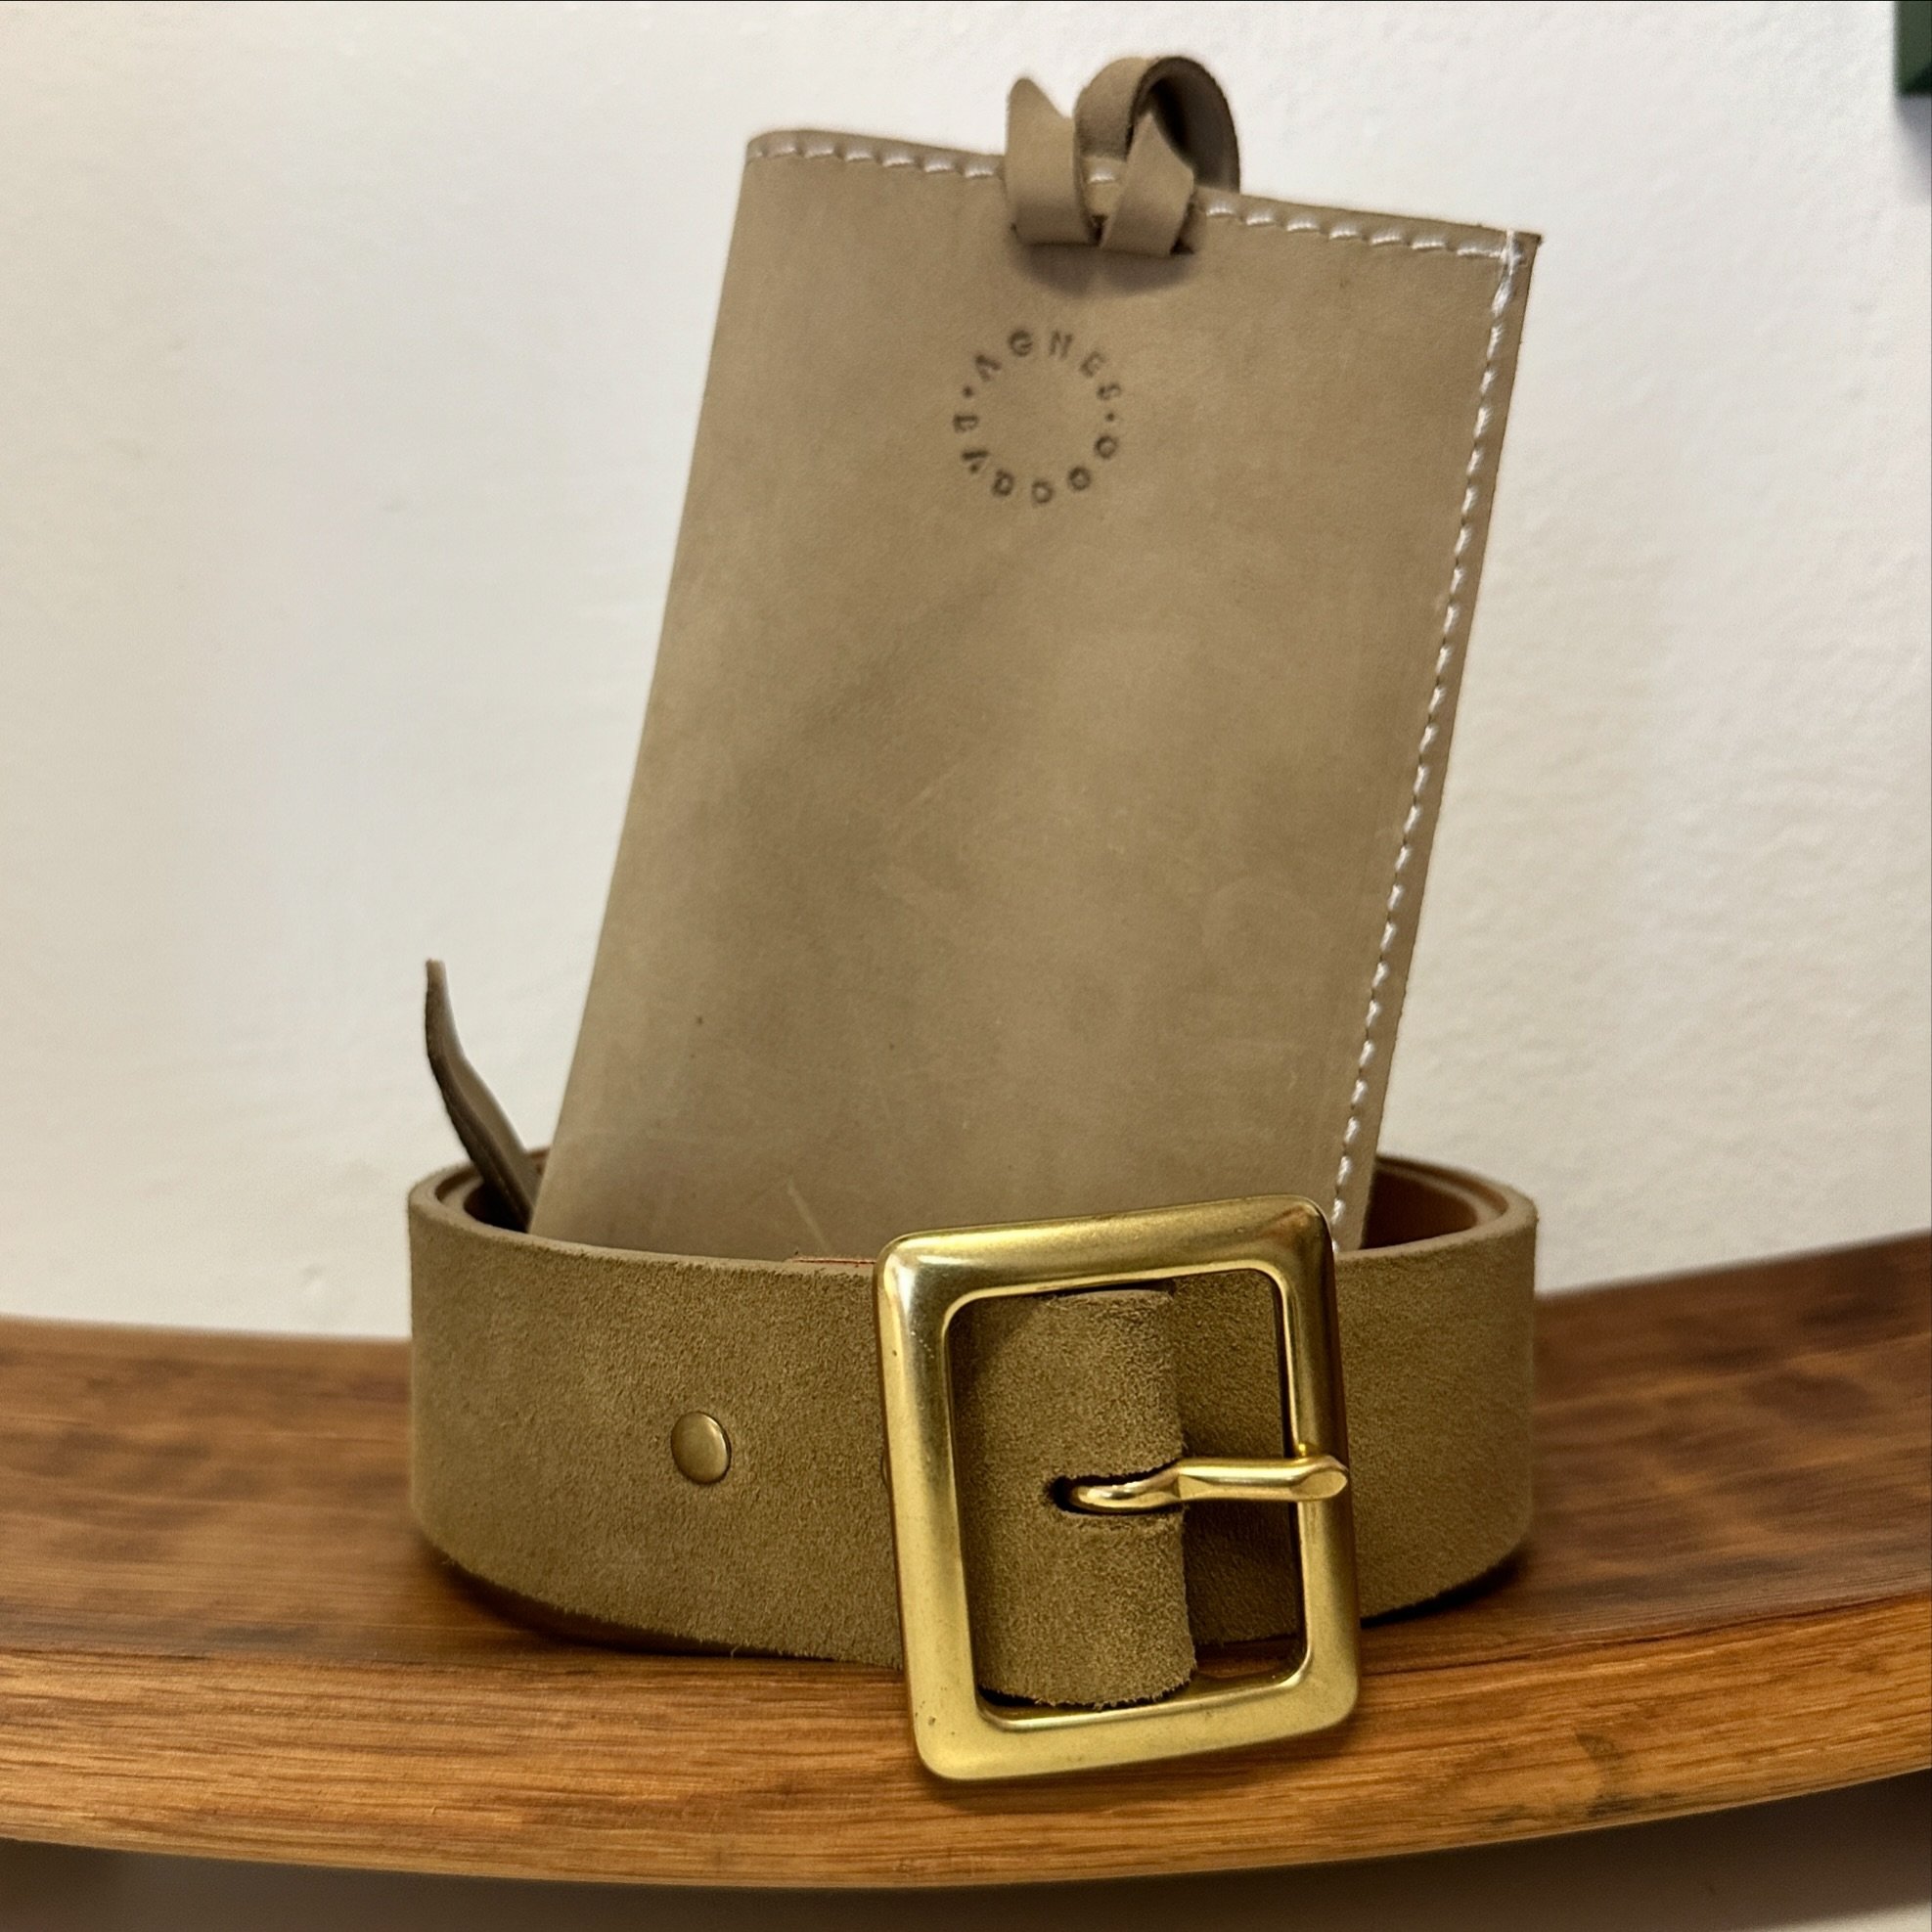 Hands free and held together; you know, it&rsquo;s also all about belts, in stock + ready to ship.

#agnesbaddoo #leather #leathergoods #sac1sac2 #beltsac #crossbody #sacpoint5 #carryall #marketsac #simplebelt #rawhide #coincase #cellphonecase #glass